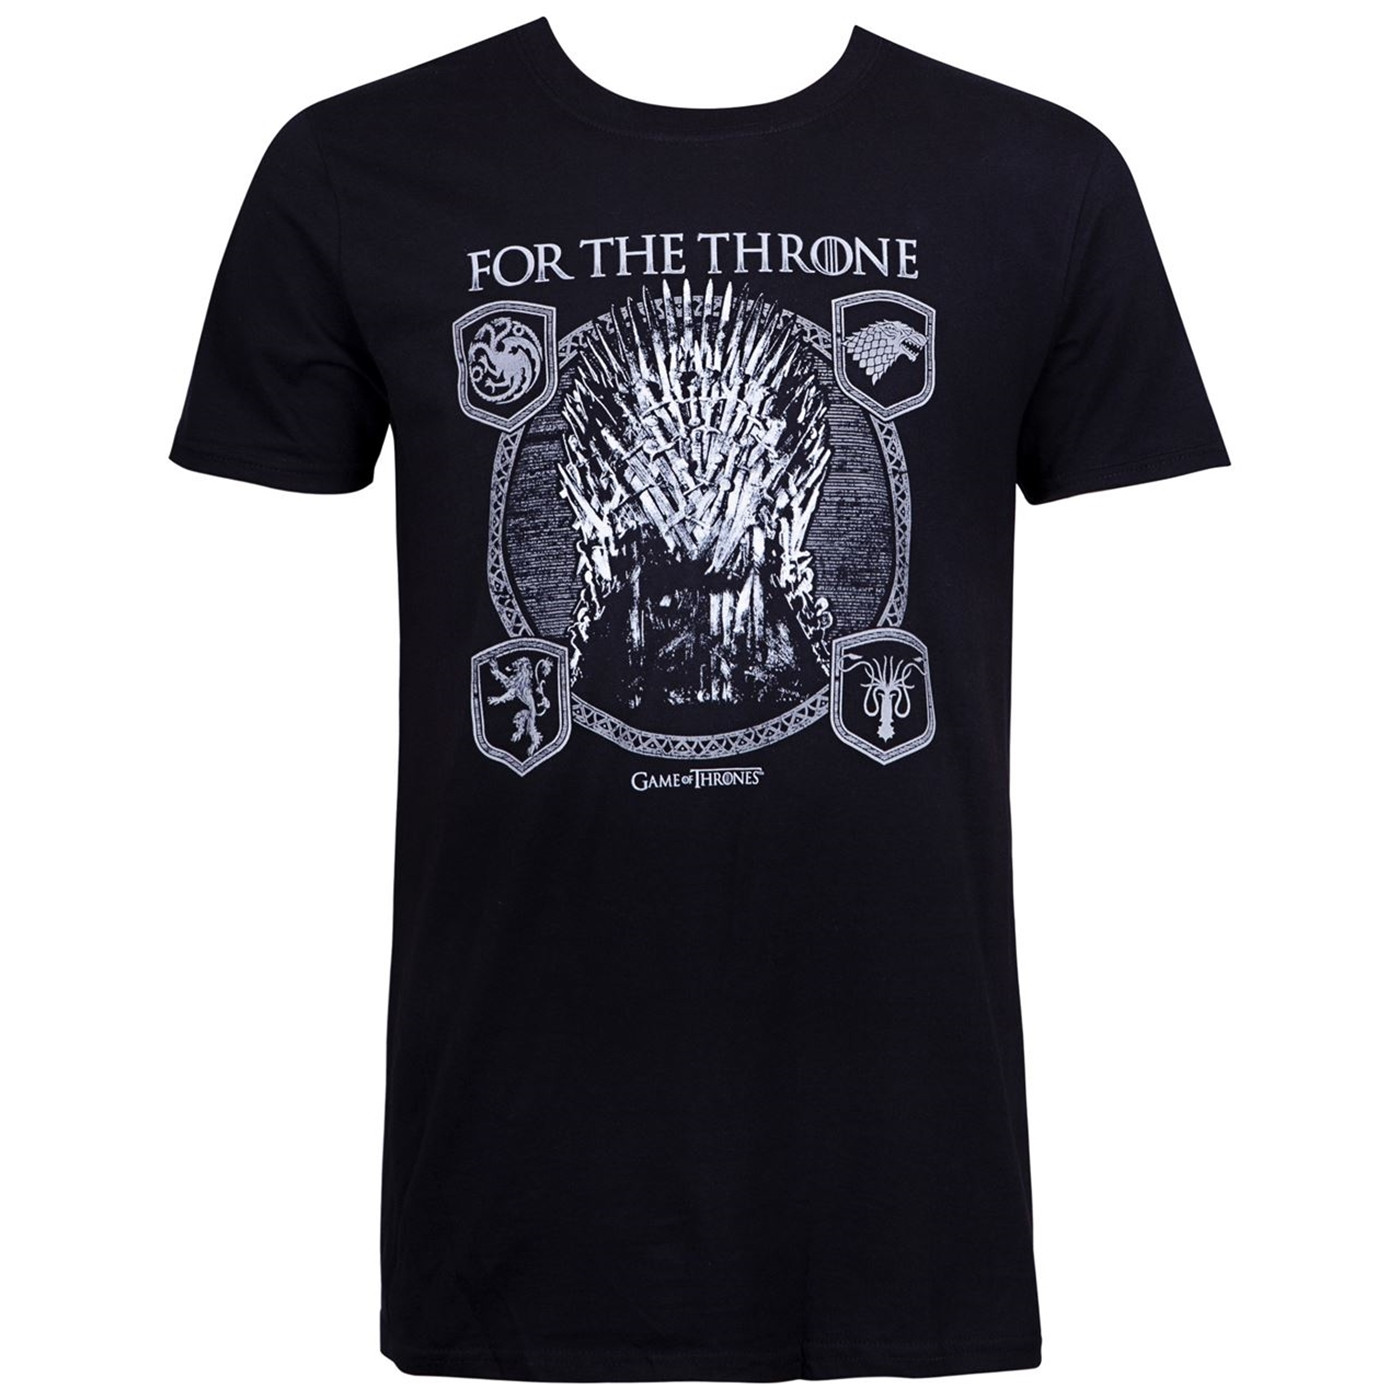 For the Throne Game of Thrones Men's T-Shirt